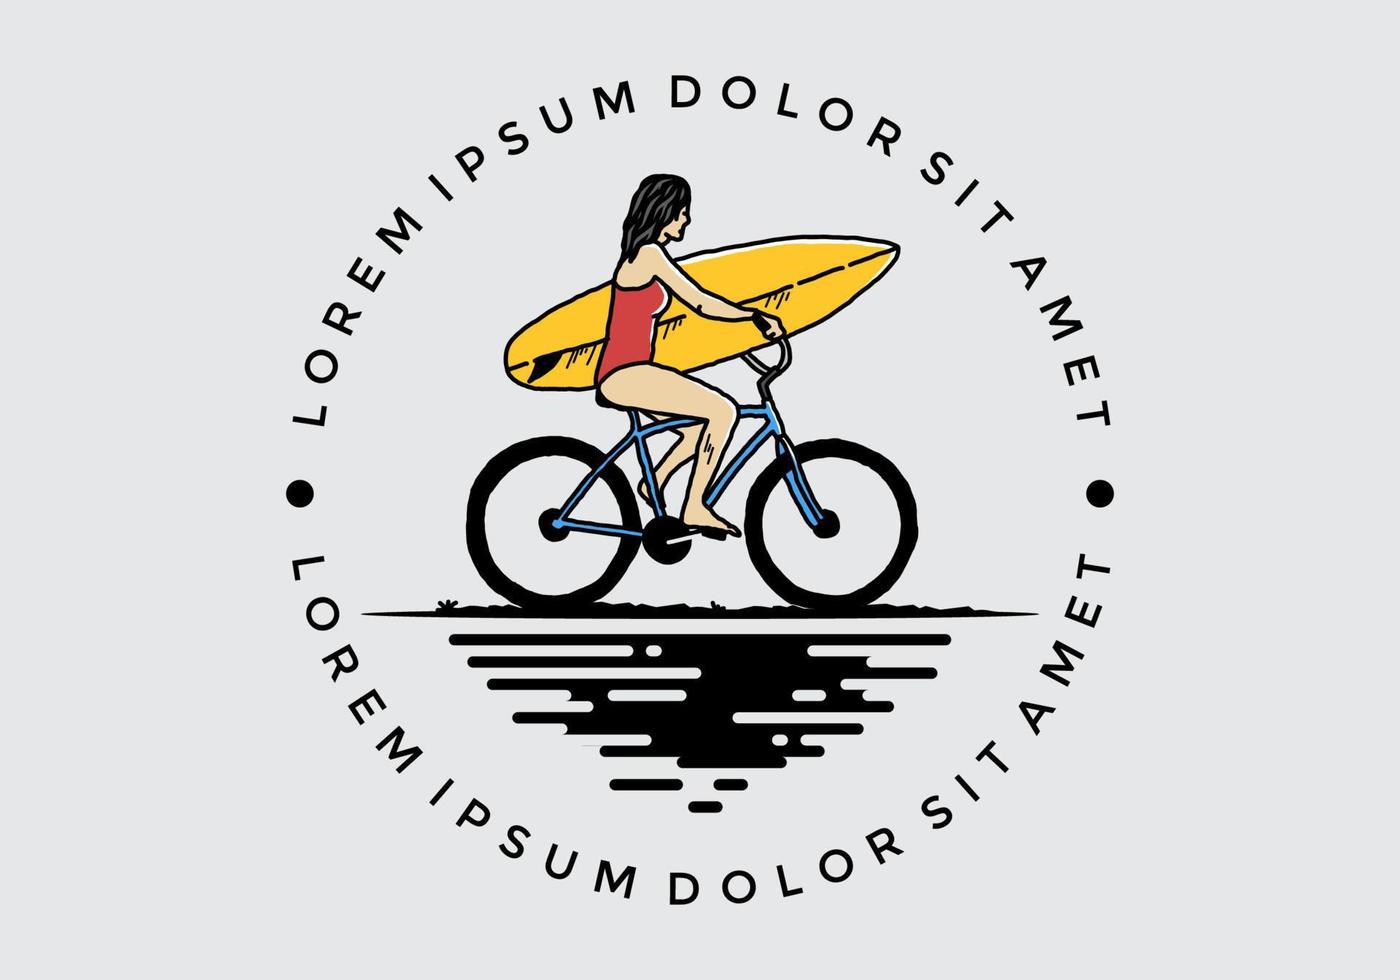 illustration of a woman going surfing on a bicycle vector